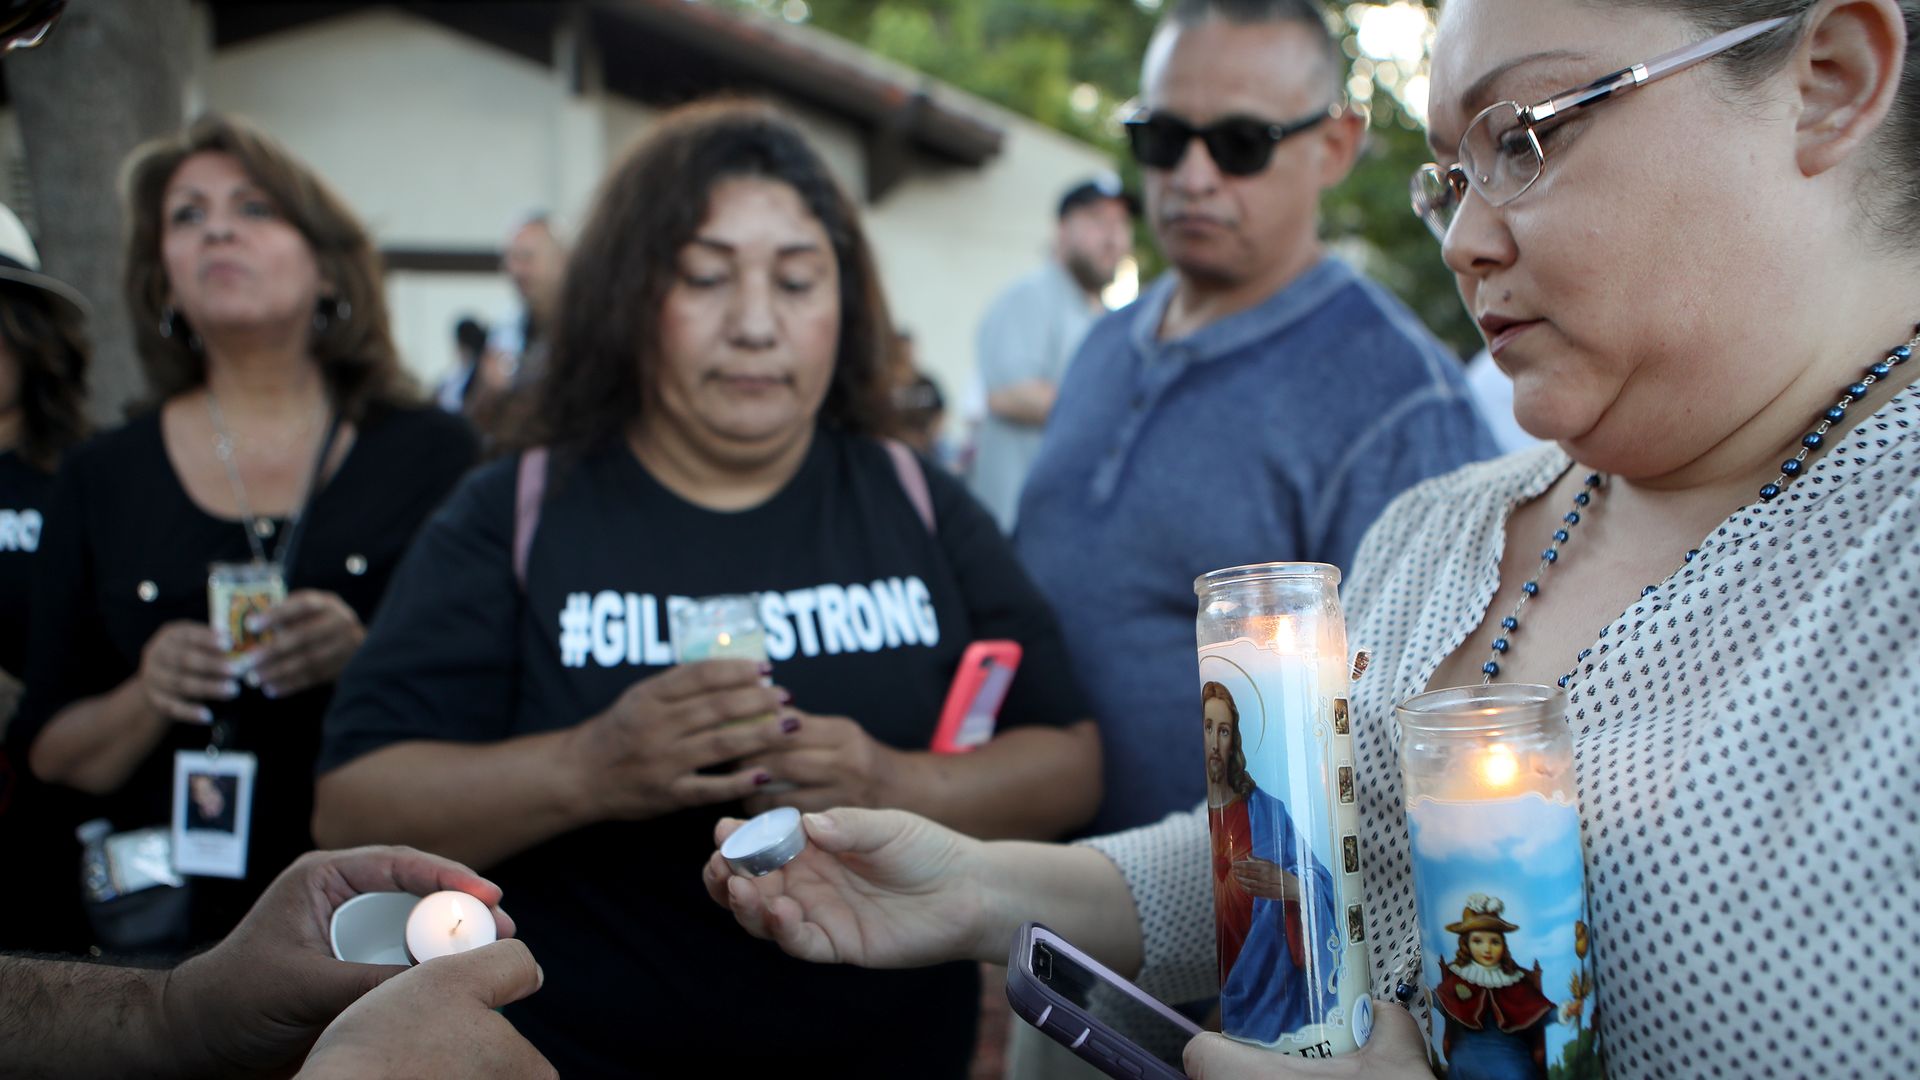  People attend a vigil for victims of the mass shooting at the Gilroy Garlic Festival on July 29.